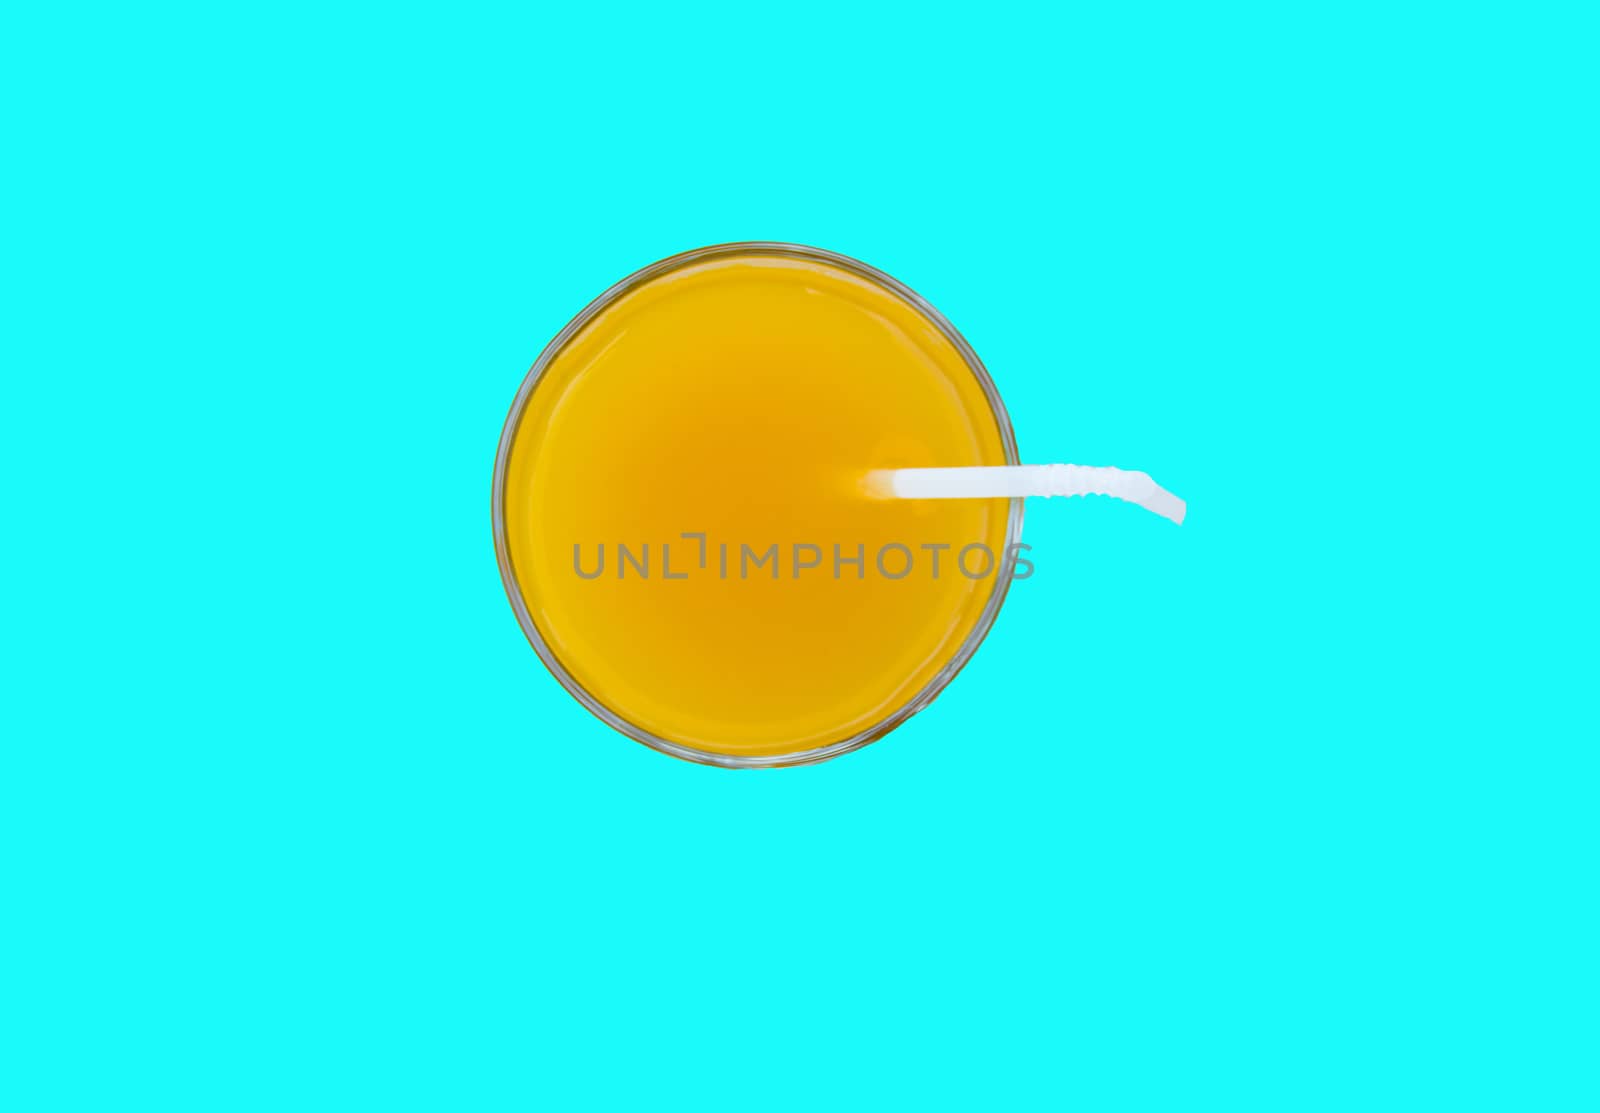 Summer drink - freshly squeezed orange juice in a glass with a straw tube, top view, isolated on a blue background with clipping, minimalism style.